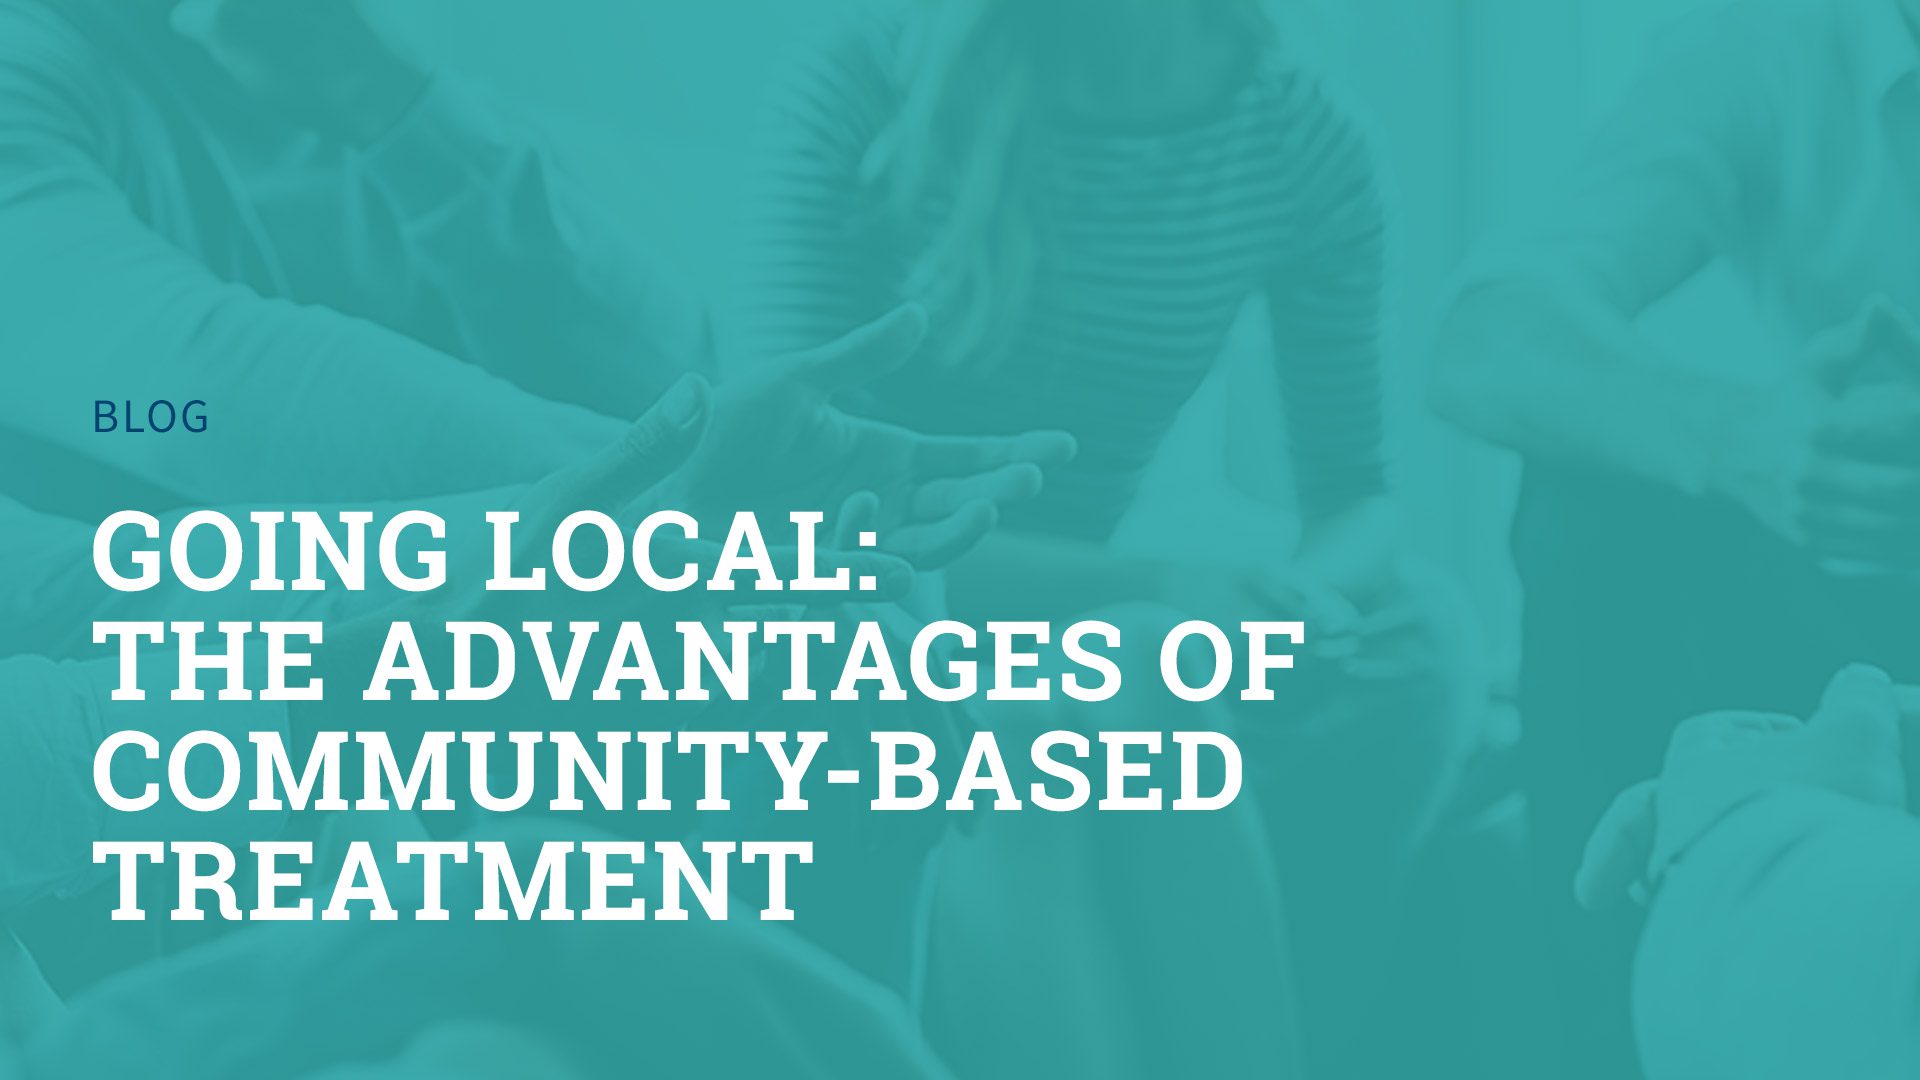 Going Local: The Advantages of Community-Based Treatment